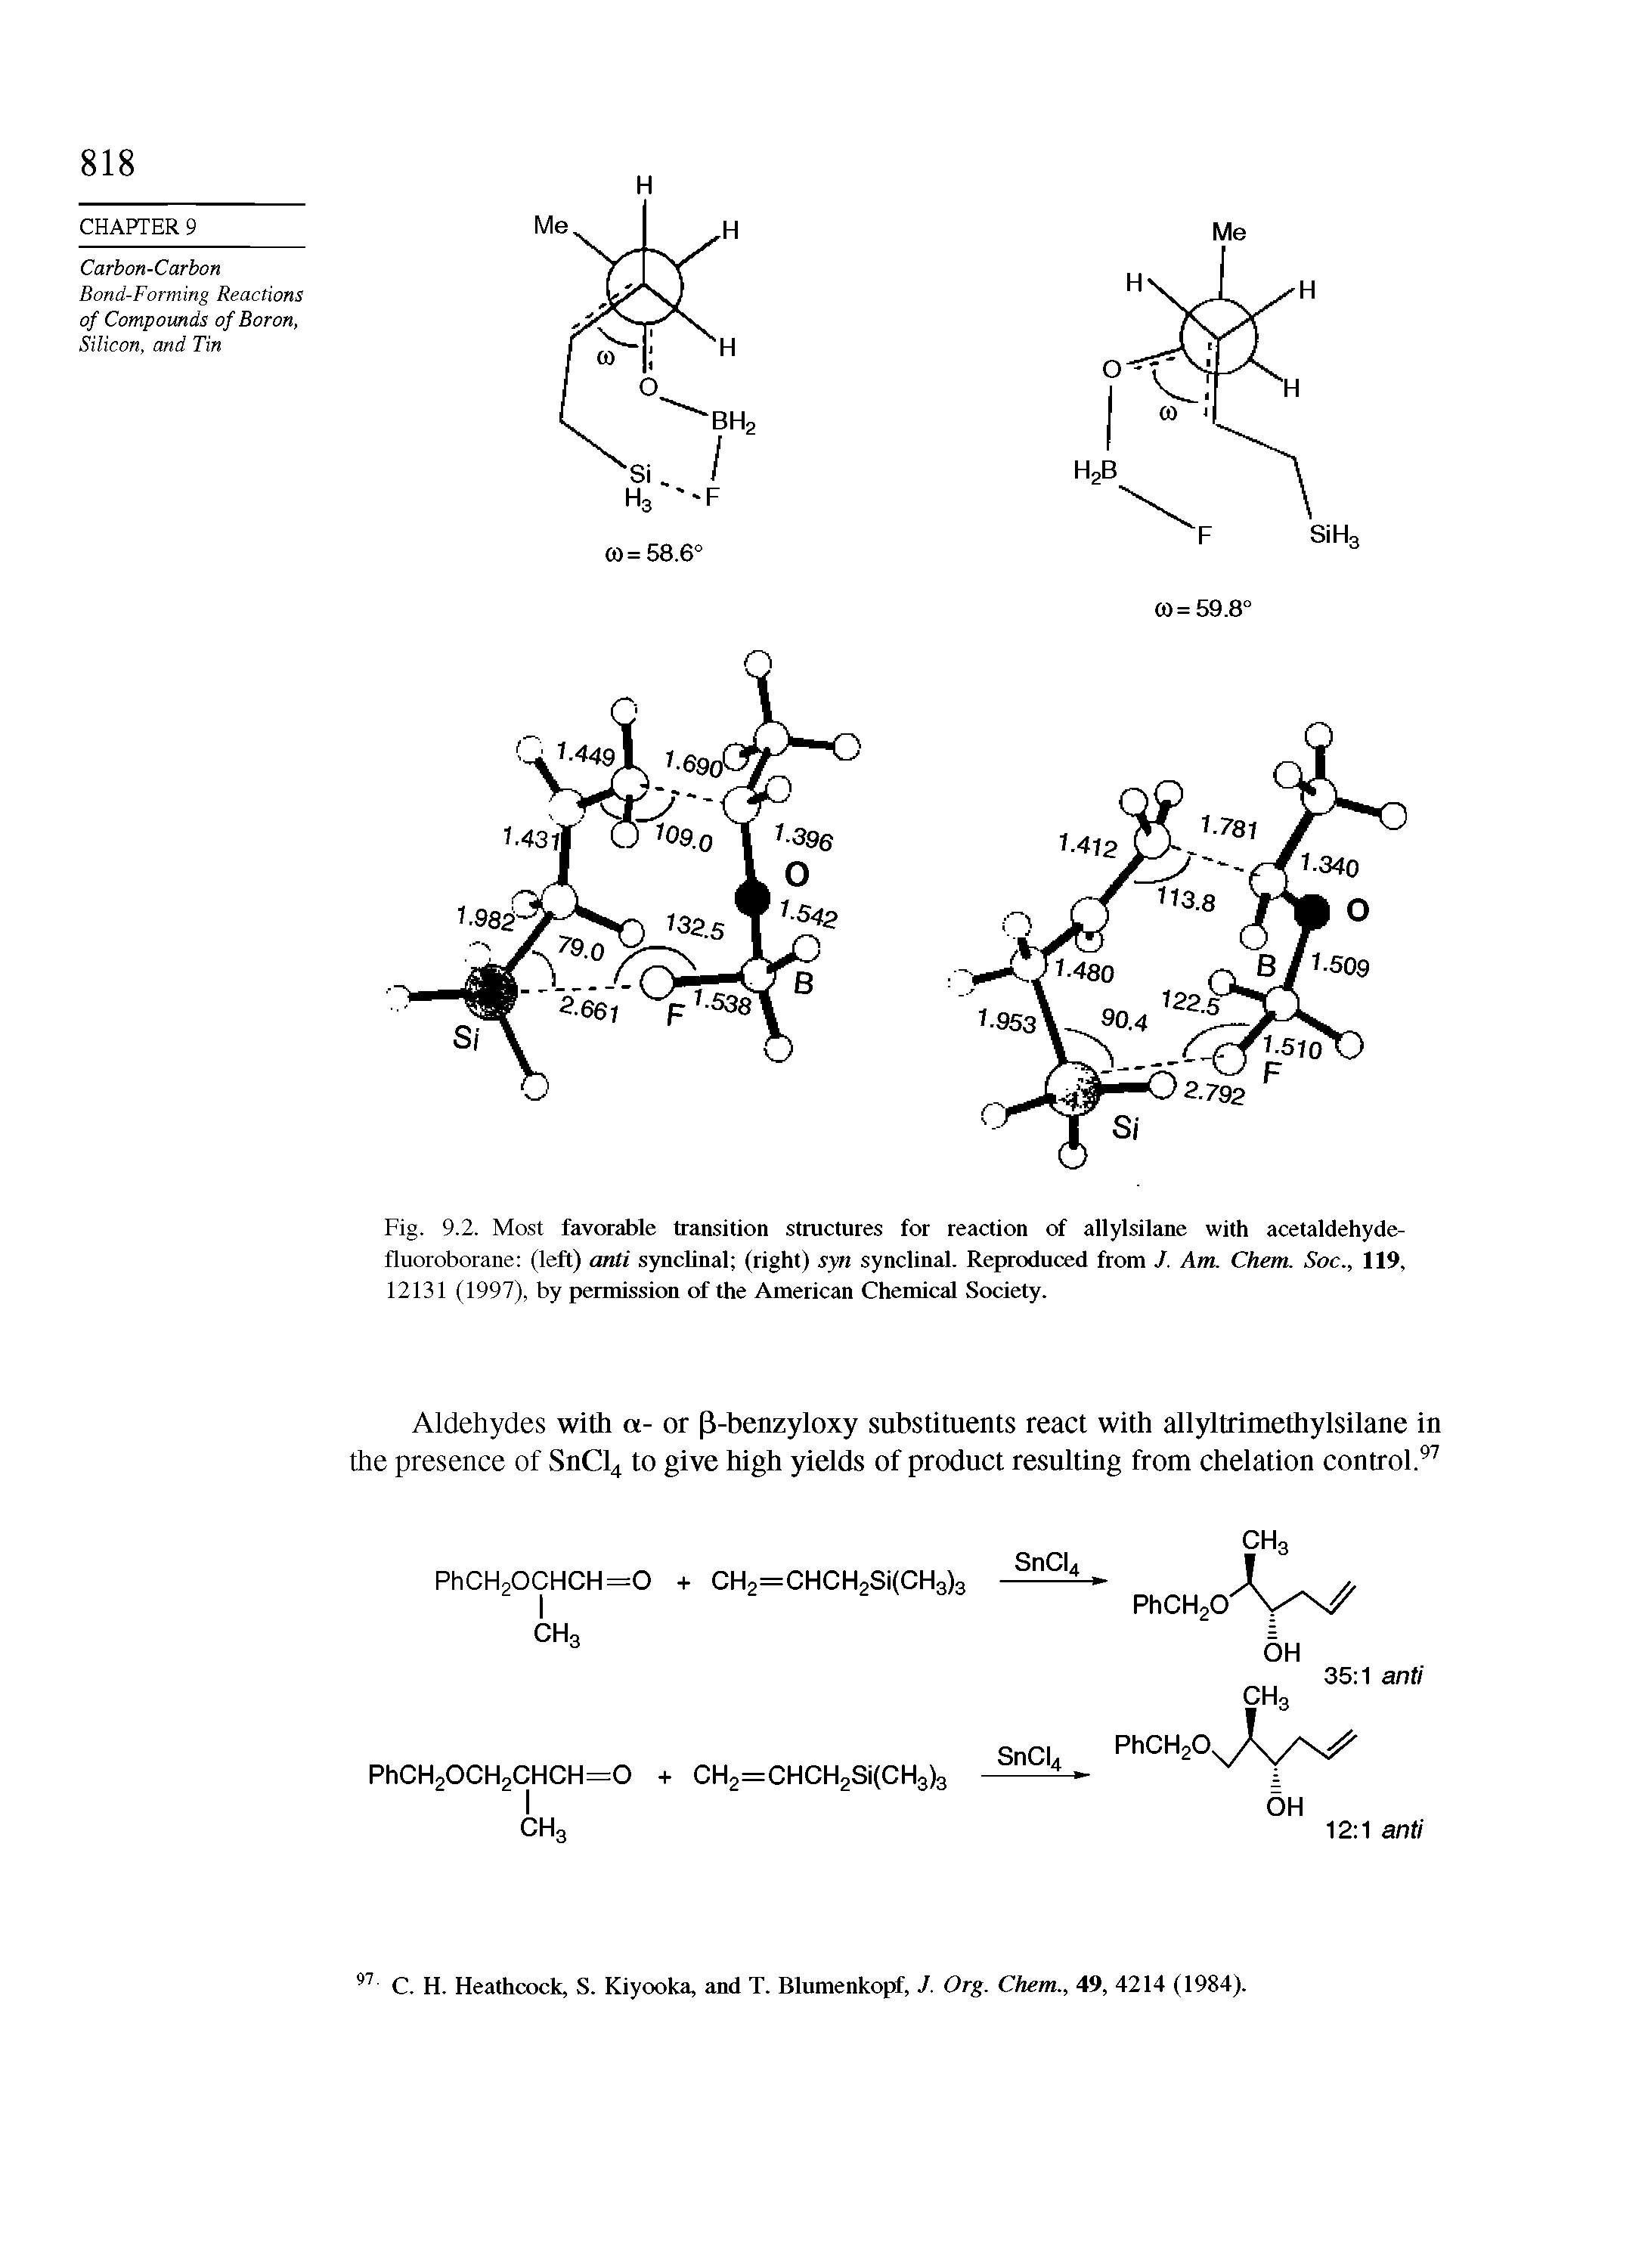 Fig. 9.2. Most favorable transition structures for reaction of allylsilane with acetaldehyde-fluoroborane (left) anti synclinal (right) syn synclinal. Reproduced from J. Am. Chem. Soc., 119, 12131 (1997), by permission of the American Chemical Society.